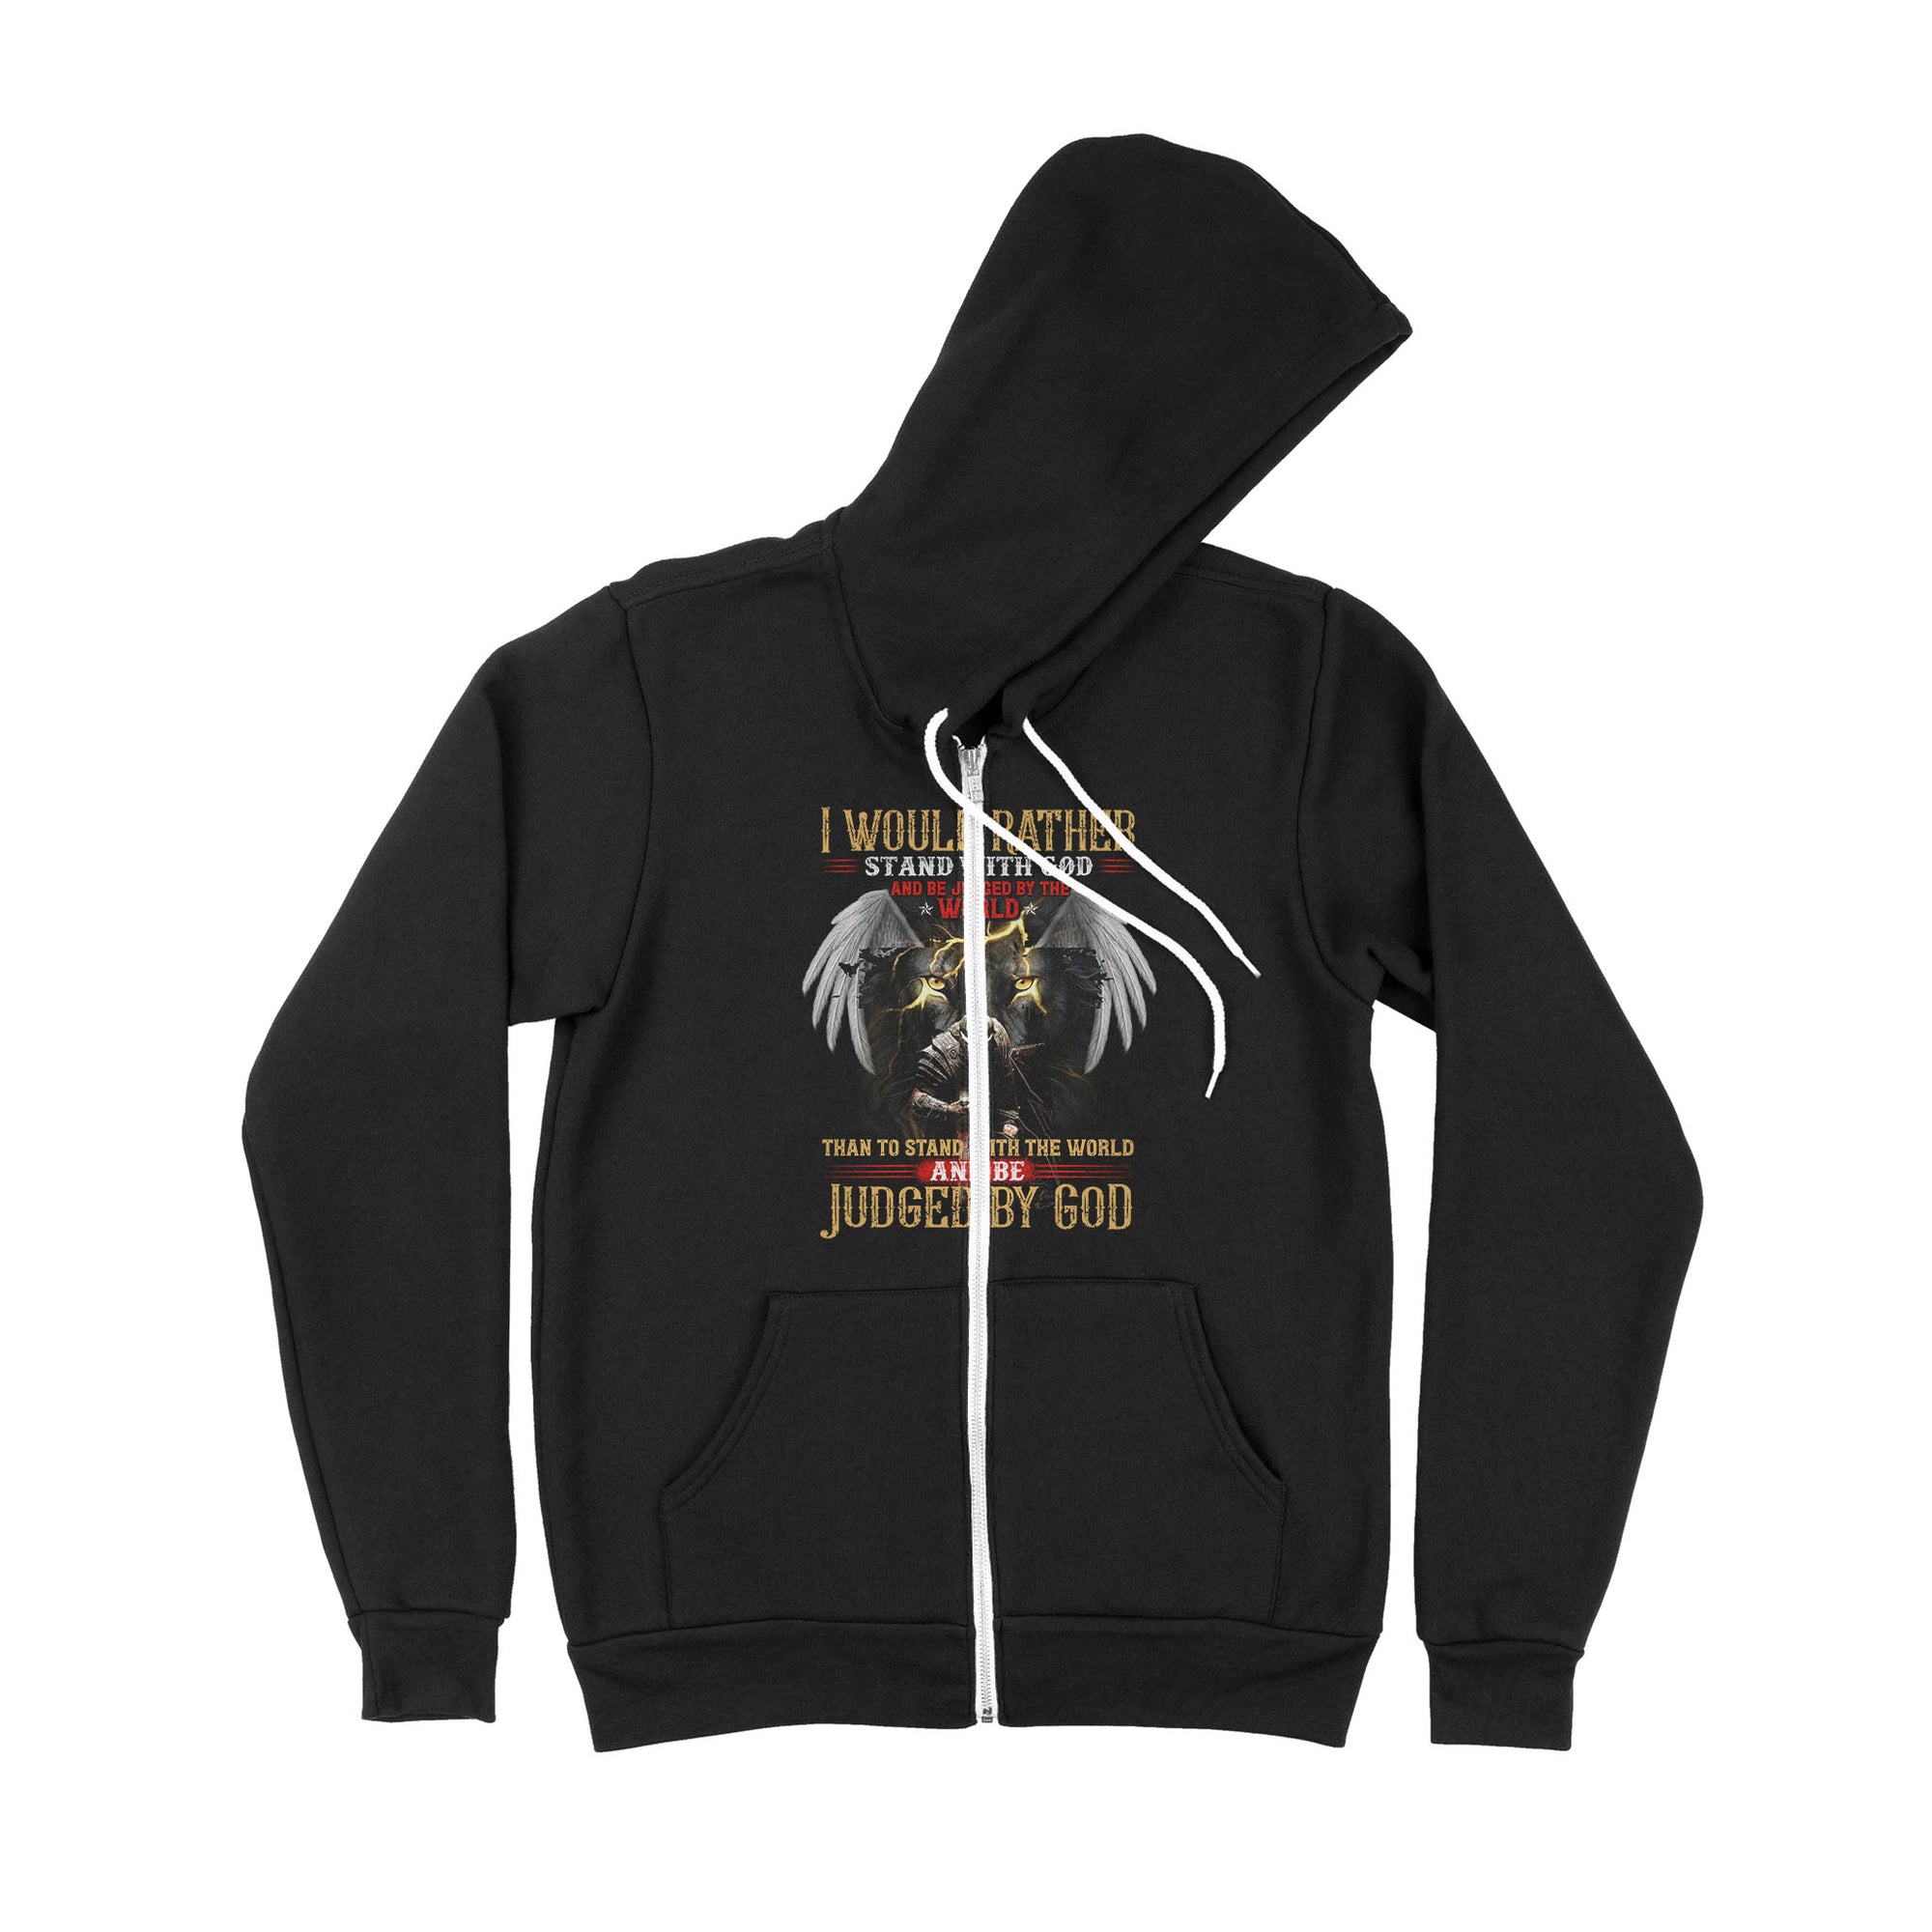 I Would Rather Stand With God And Be Judged By The World Than To Stand With The World And Be Judged By God - Premium Zip Hoodie